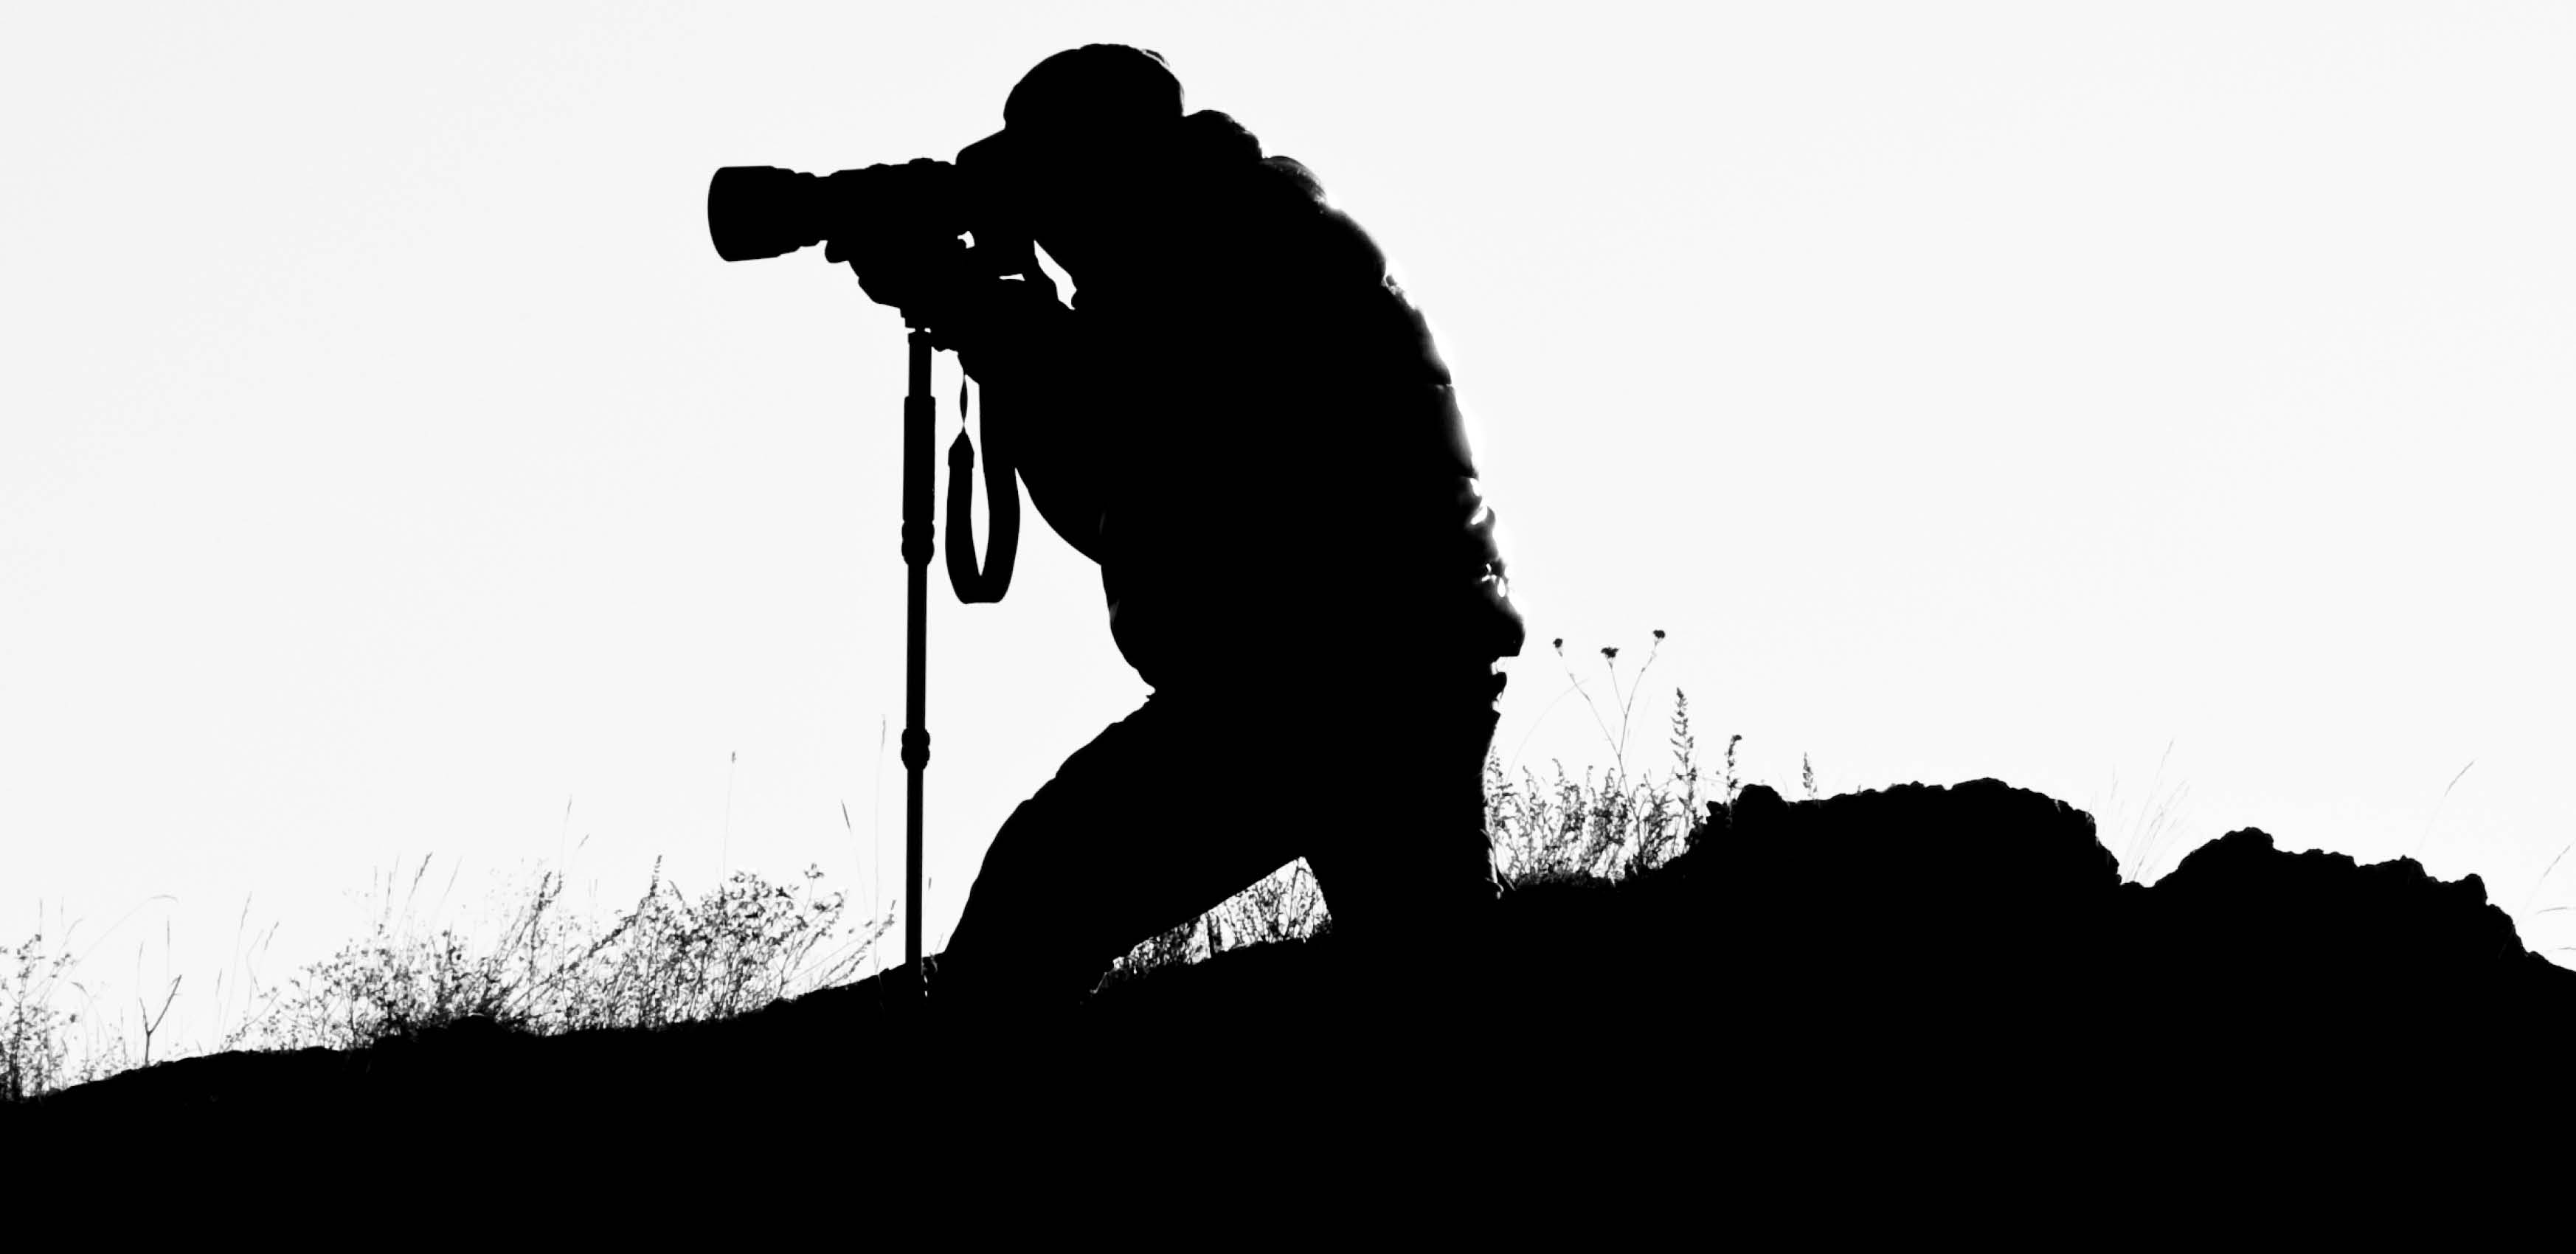 Image of person using camera